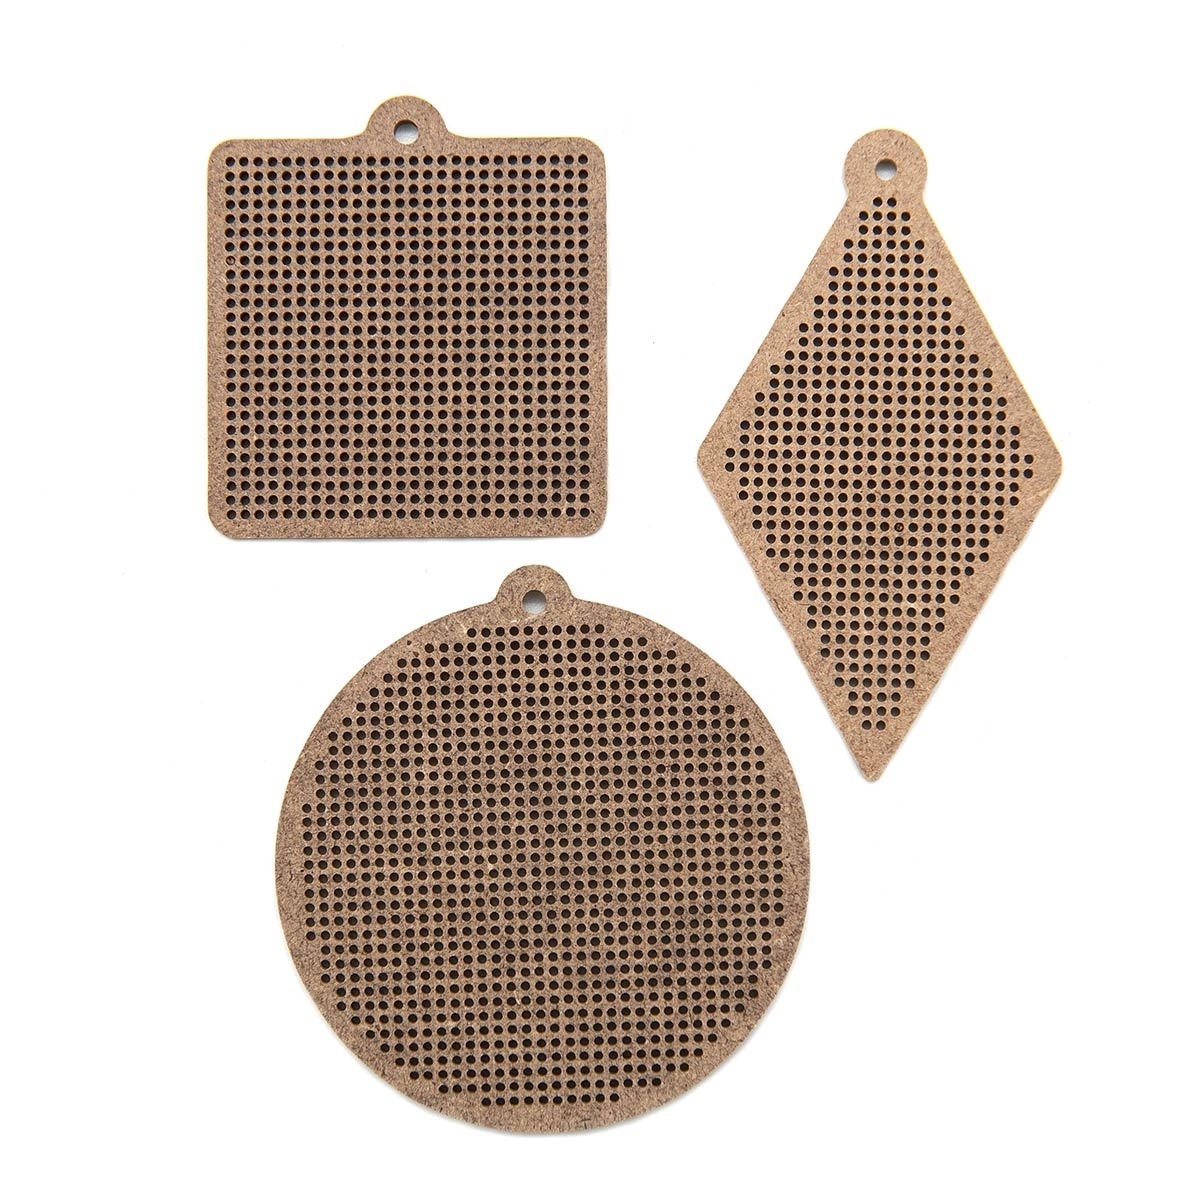 Geometry Perforated Canvas Set фото 1